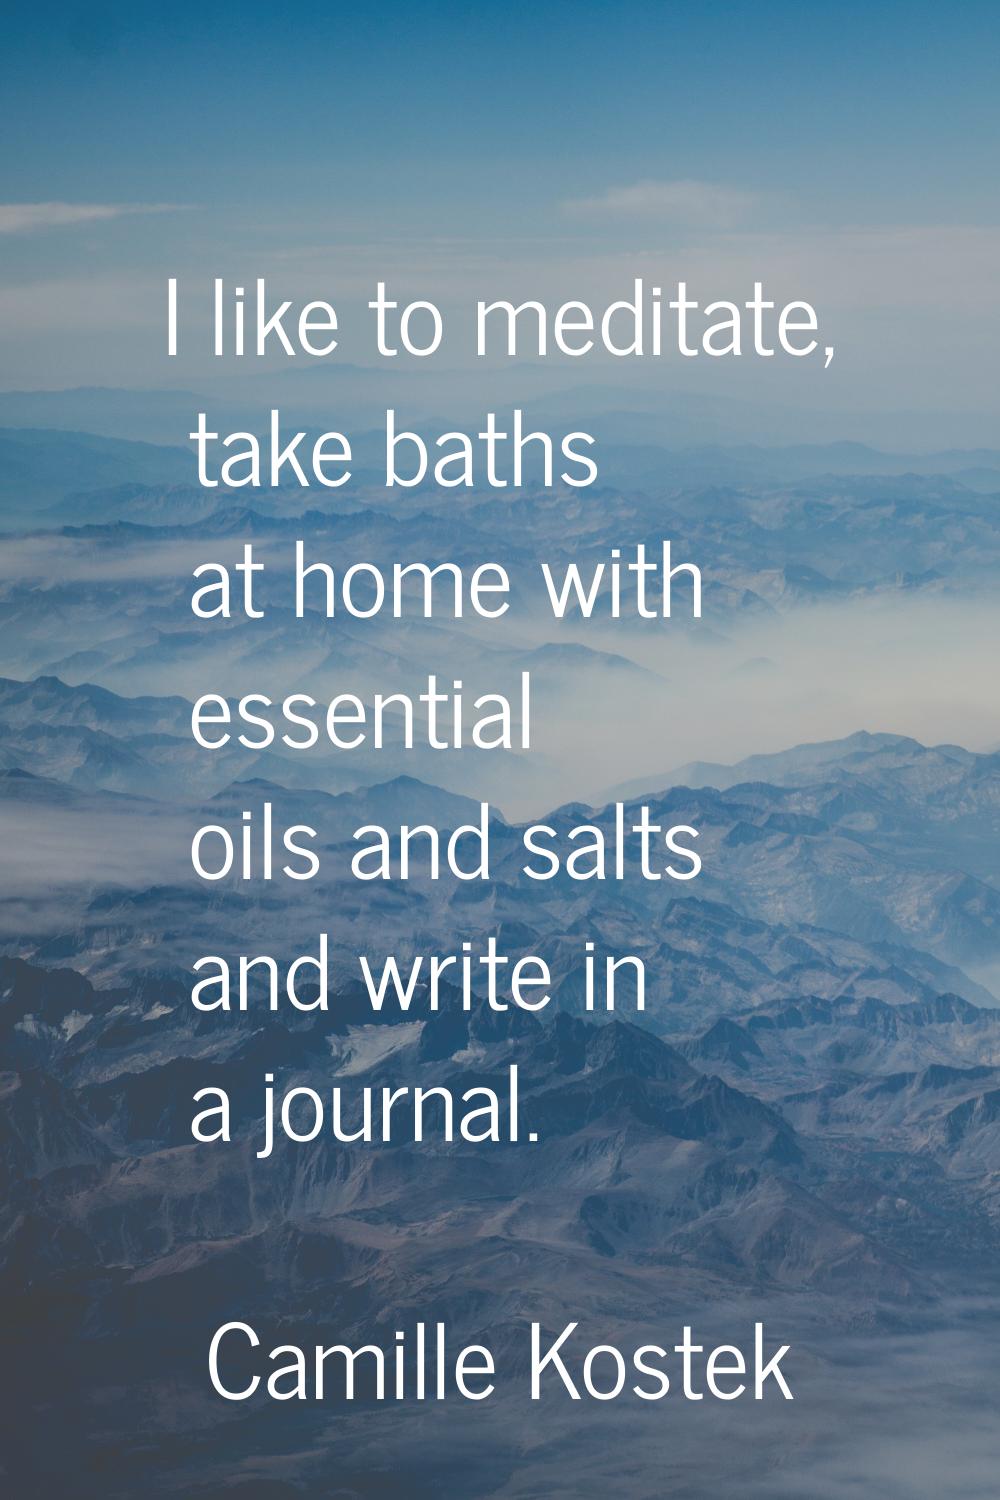 I like to meditate, take baths at home with essential oils and salts and write in a journal.